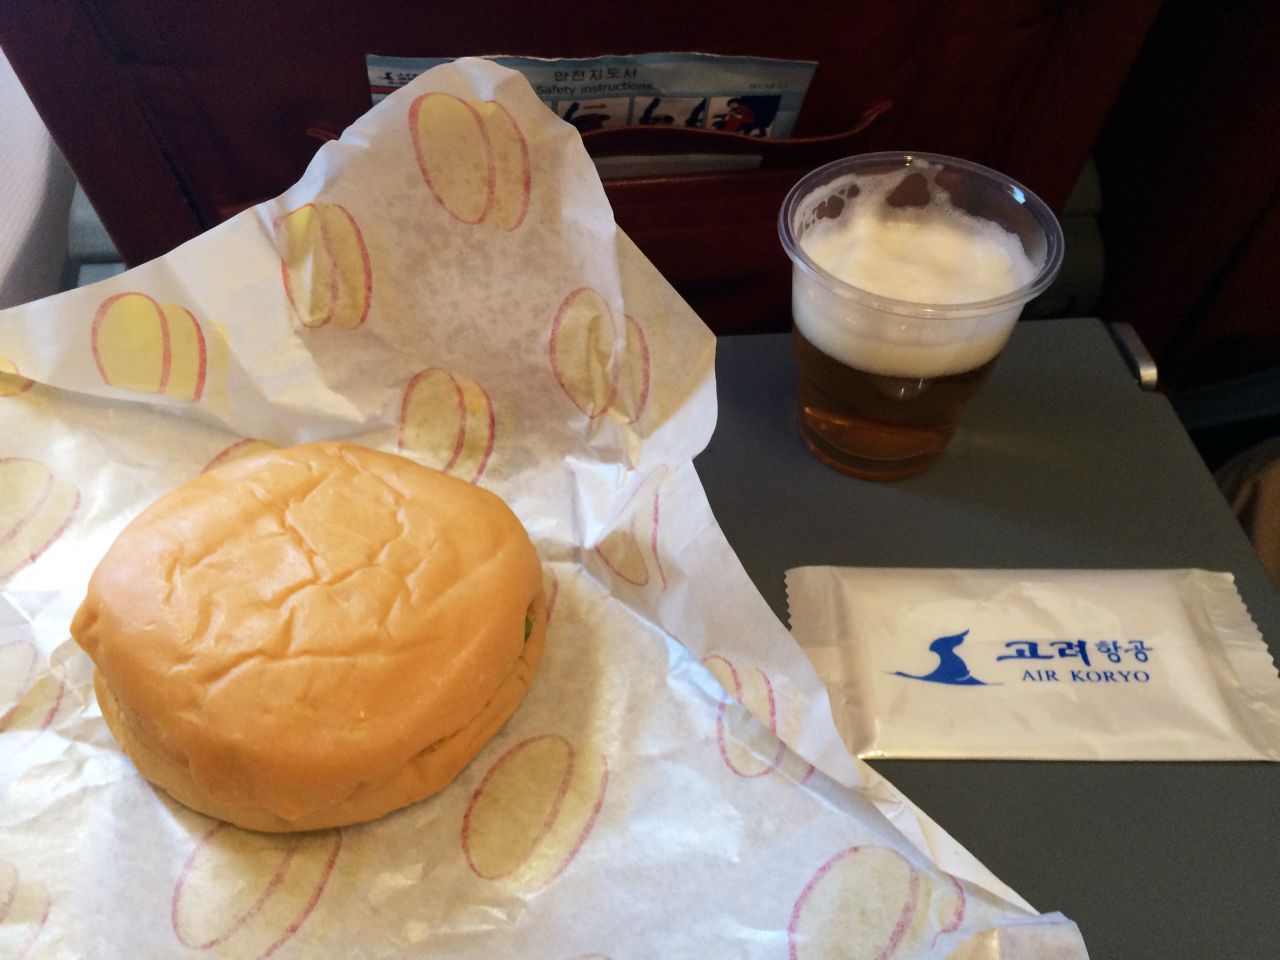 The in-flight meal on Air Koryo is a burger and a glass of North Korean beer.